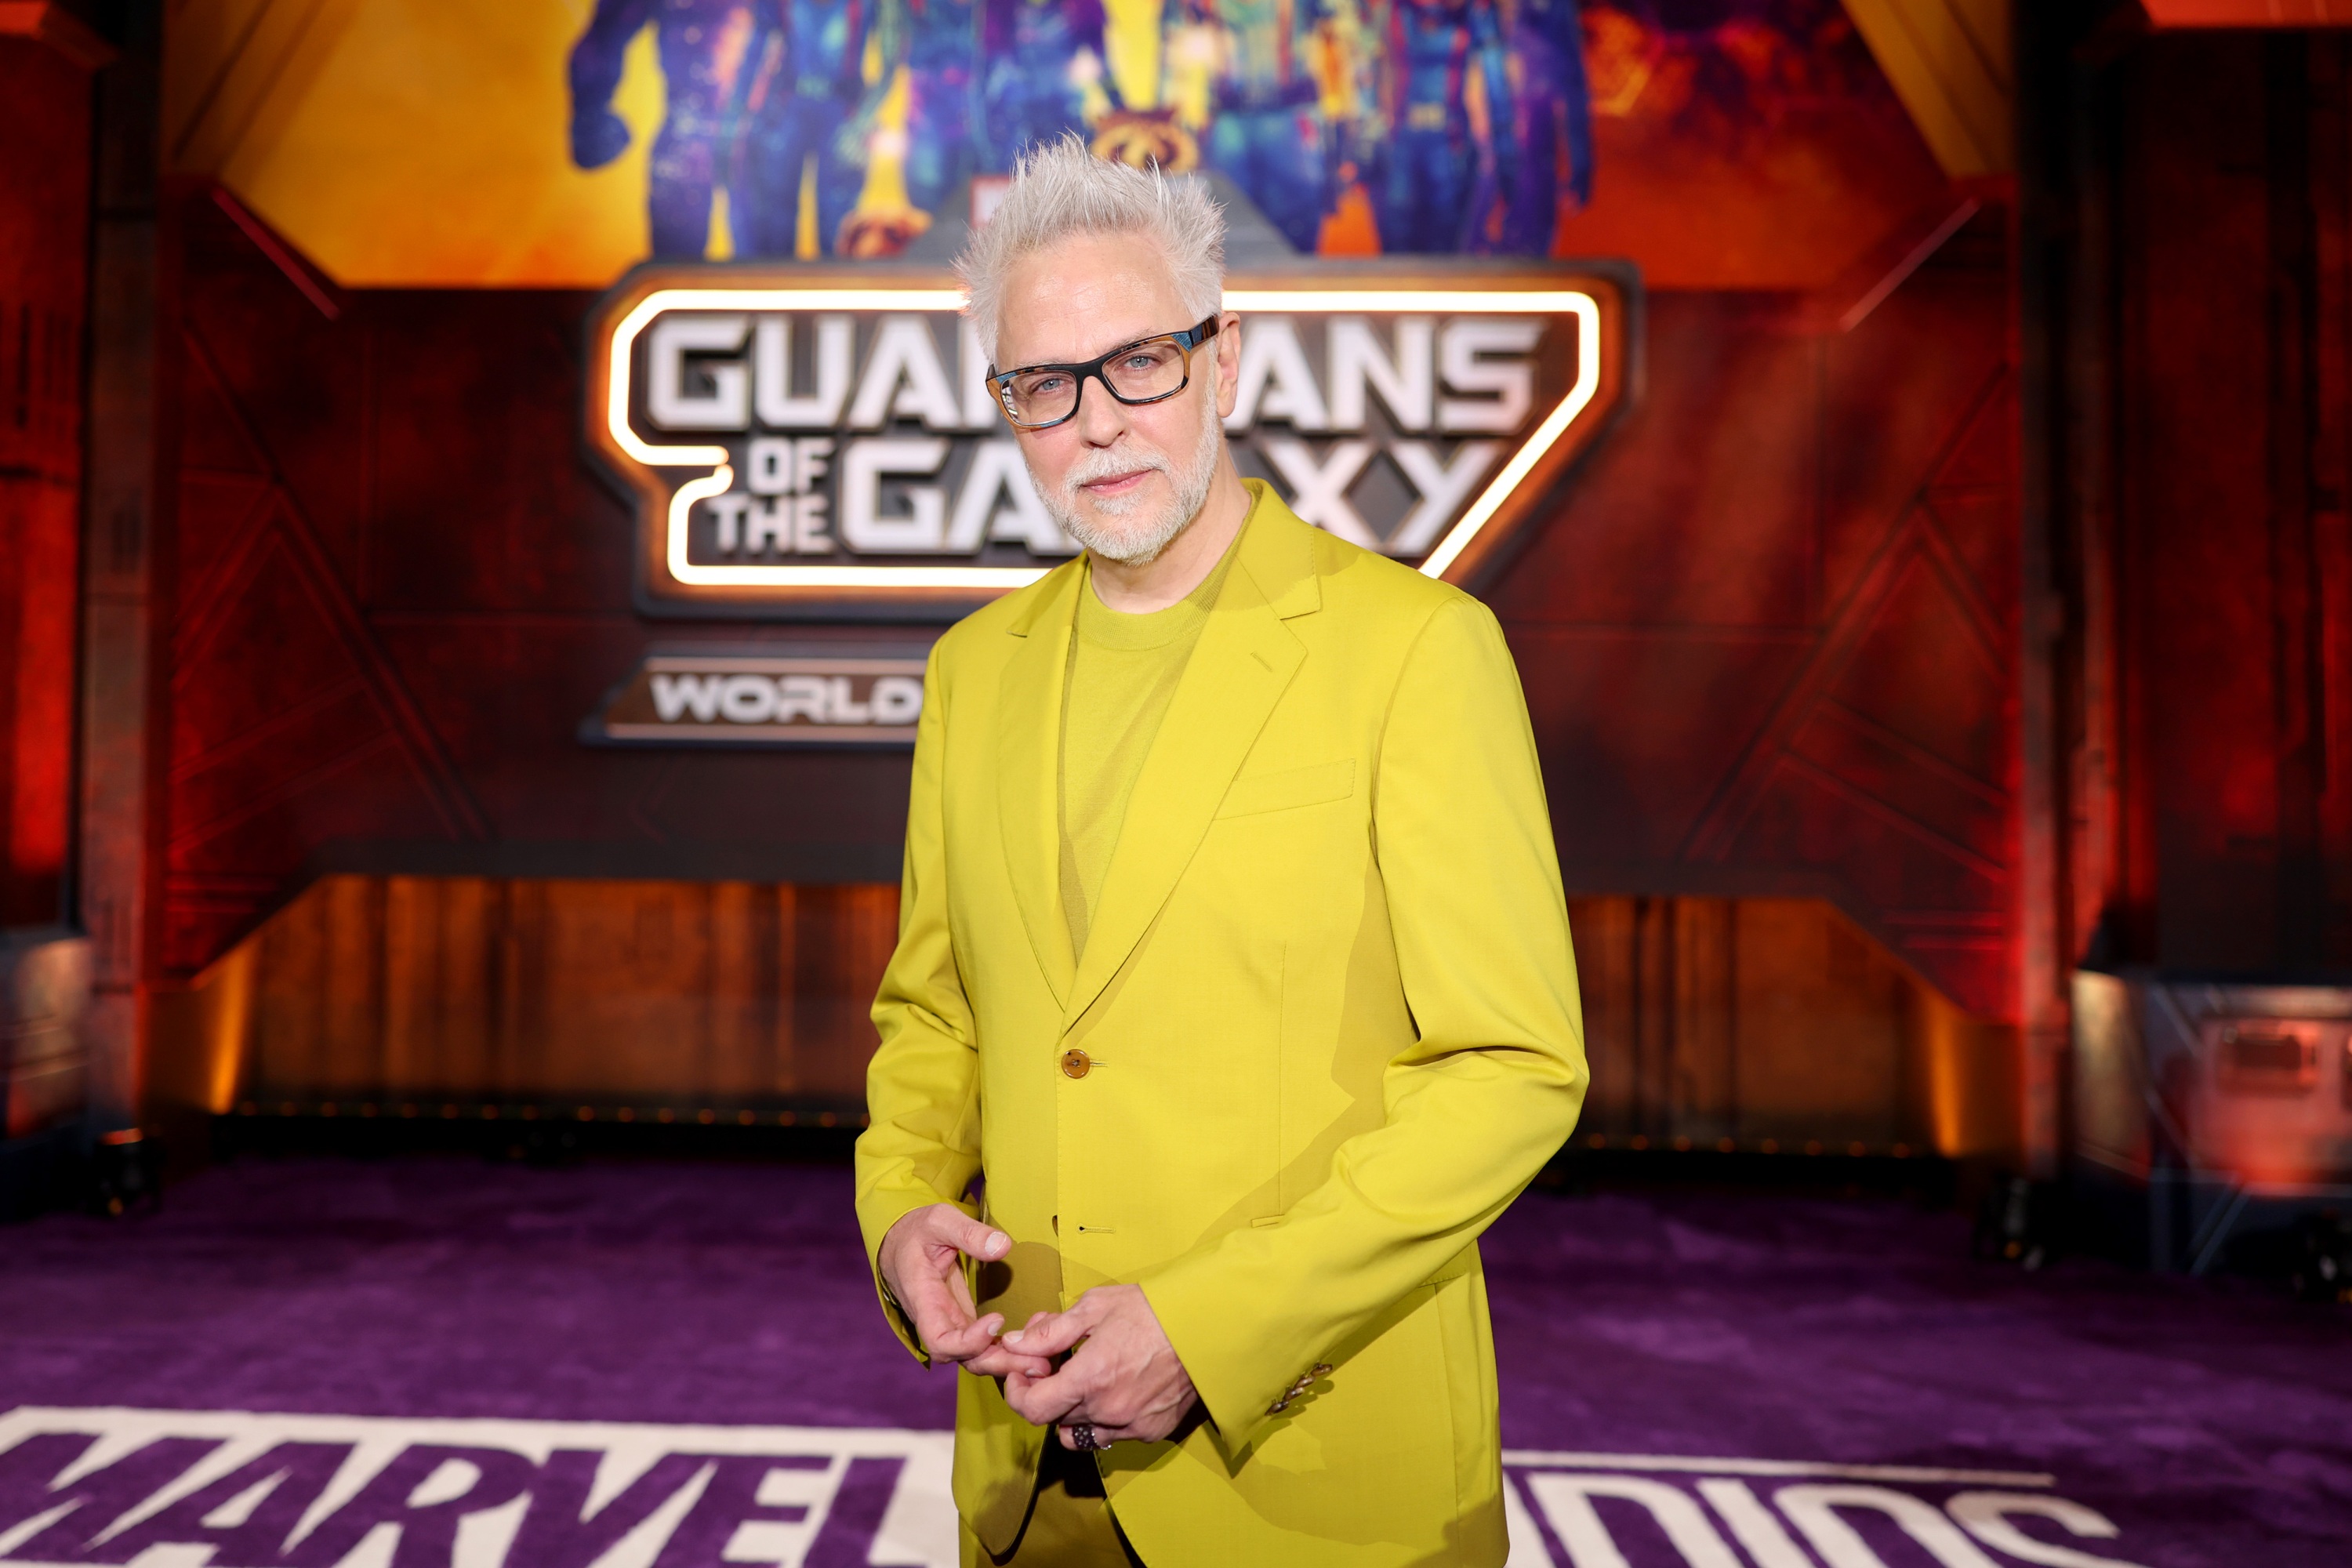 HOLLYWOOD, CALIFORNIA - APRIL 27: James Gunn attends Guardians of the Galaxy Vol. 3 World Premiere at the Dolby Theater in Hollywood, California on April 27, 2023. (Photo by Rich Polk/Getty Images for Disney)